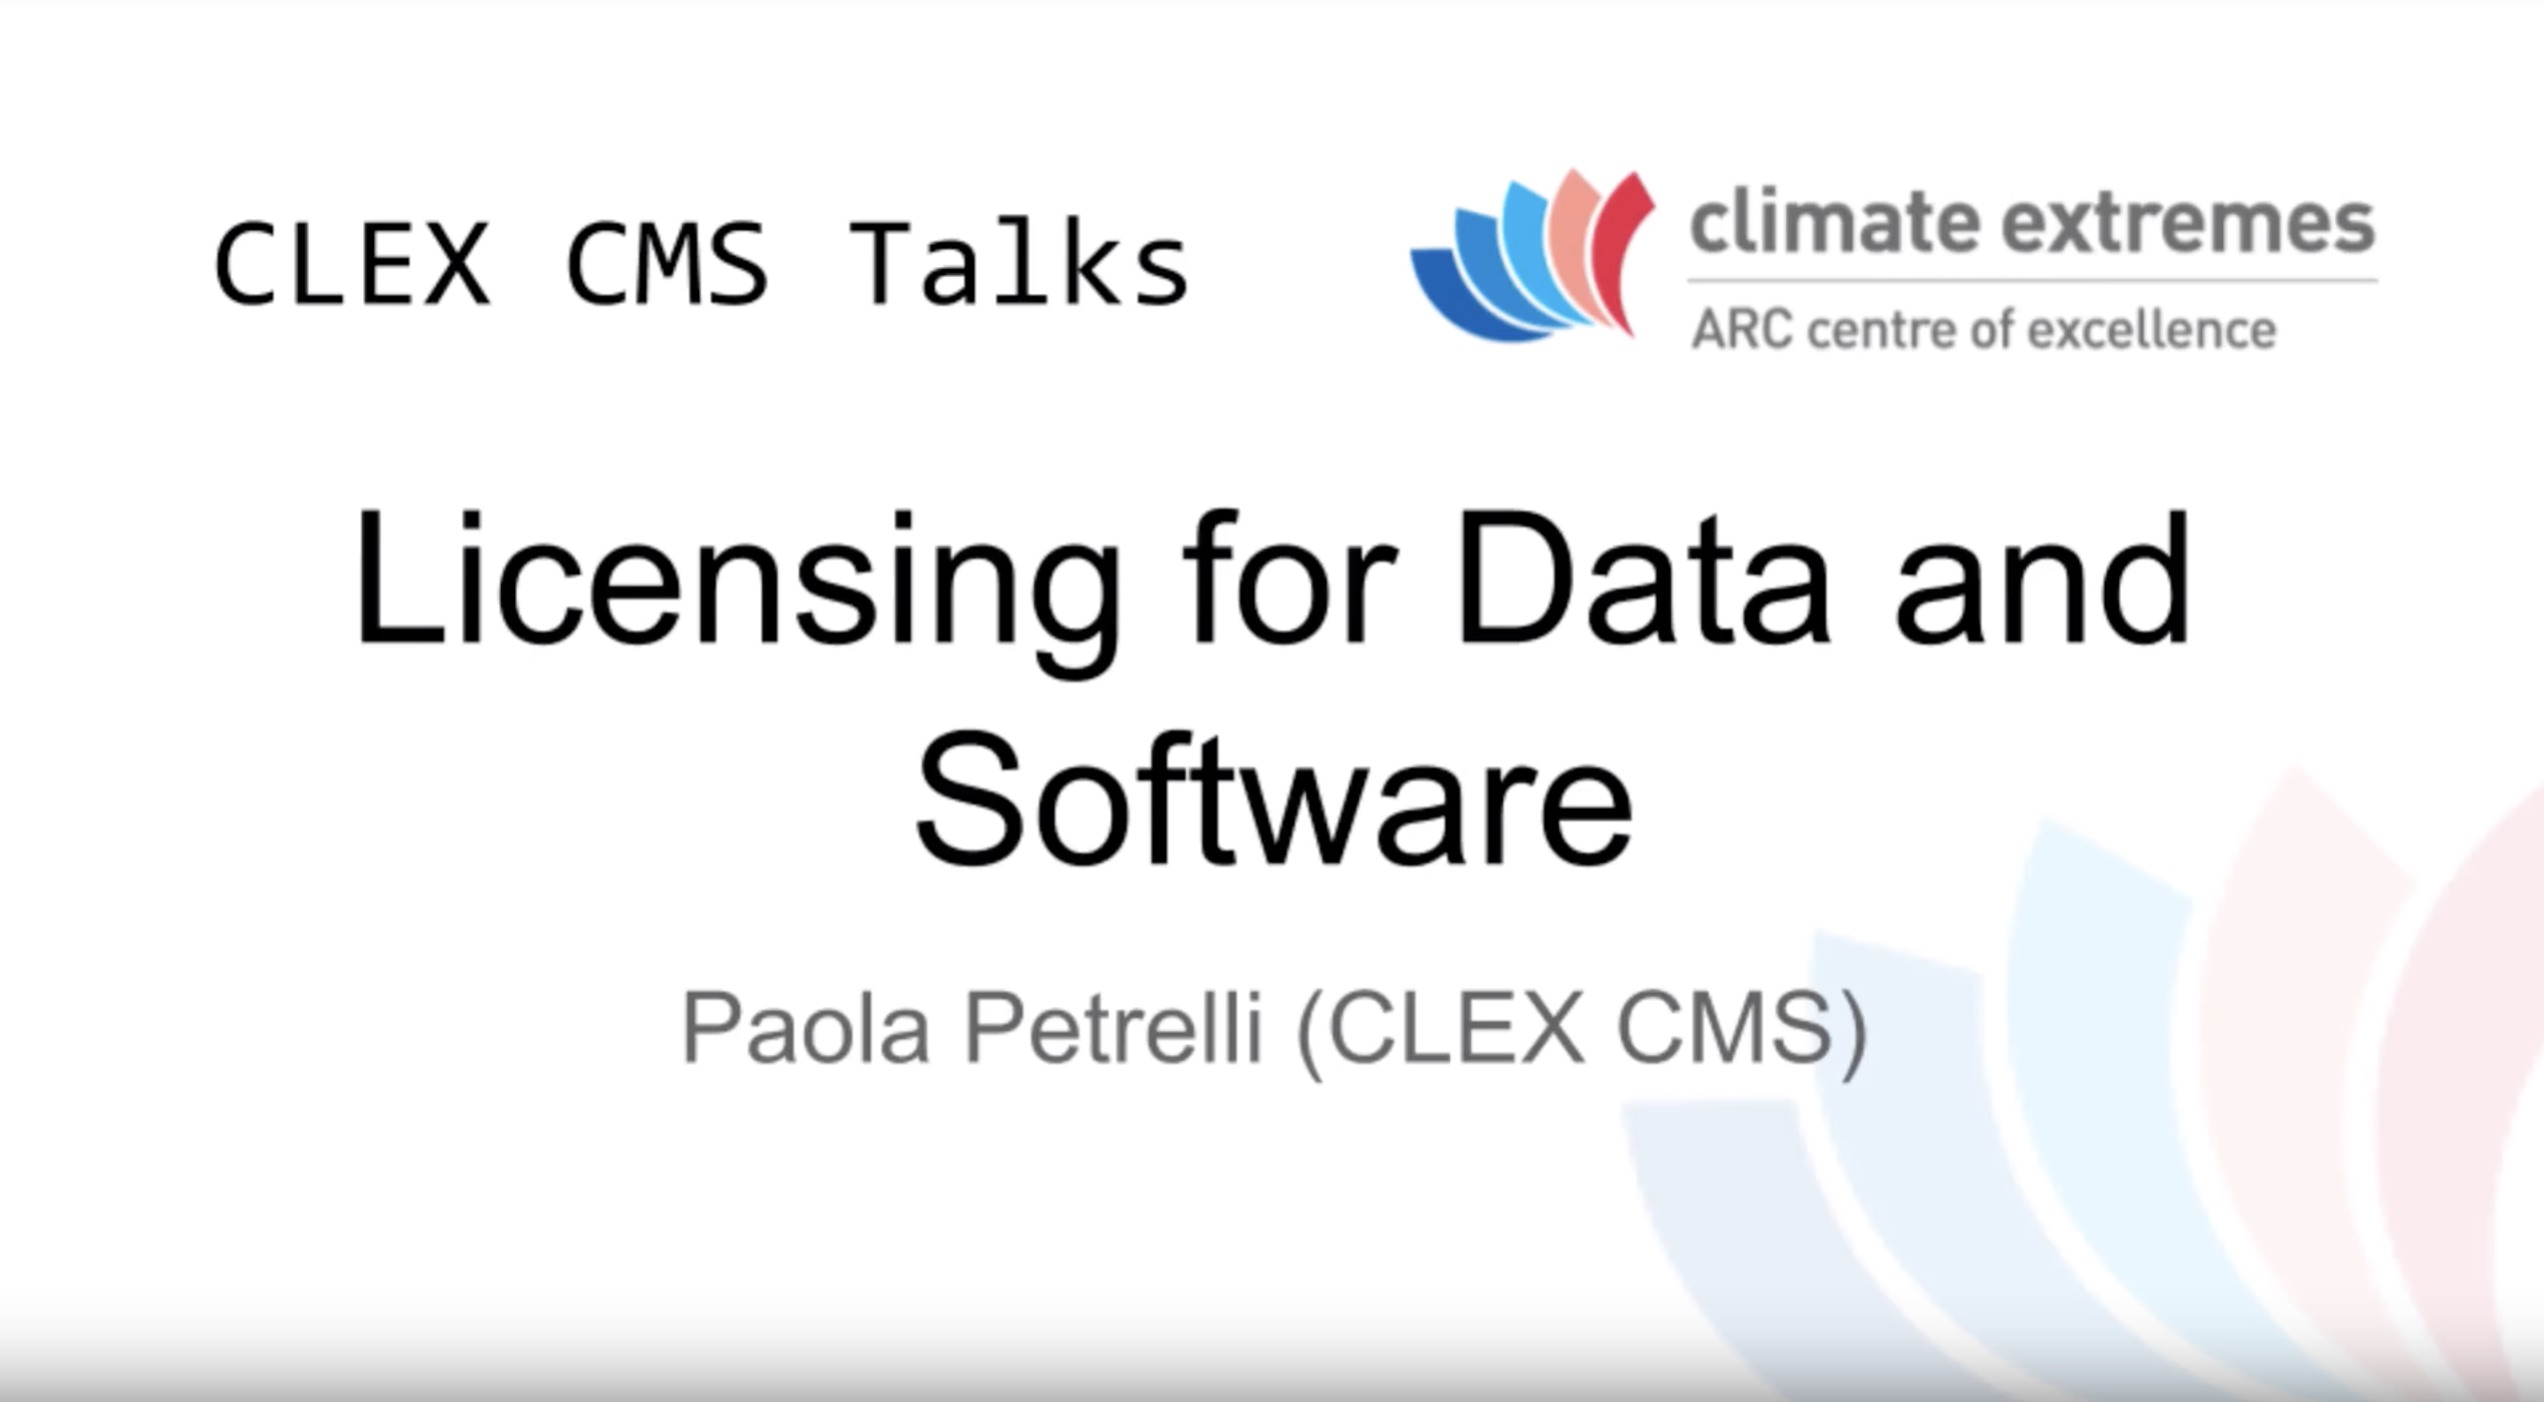 CMS talks: Licensing for data and software